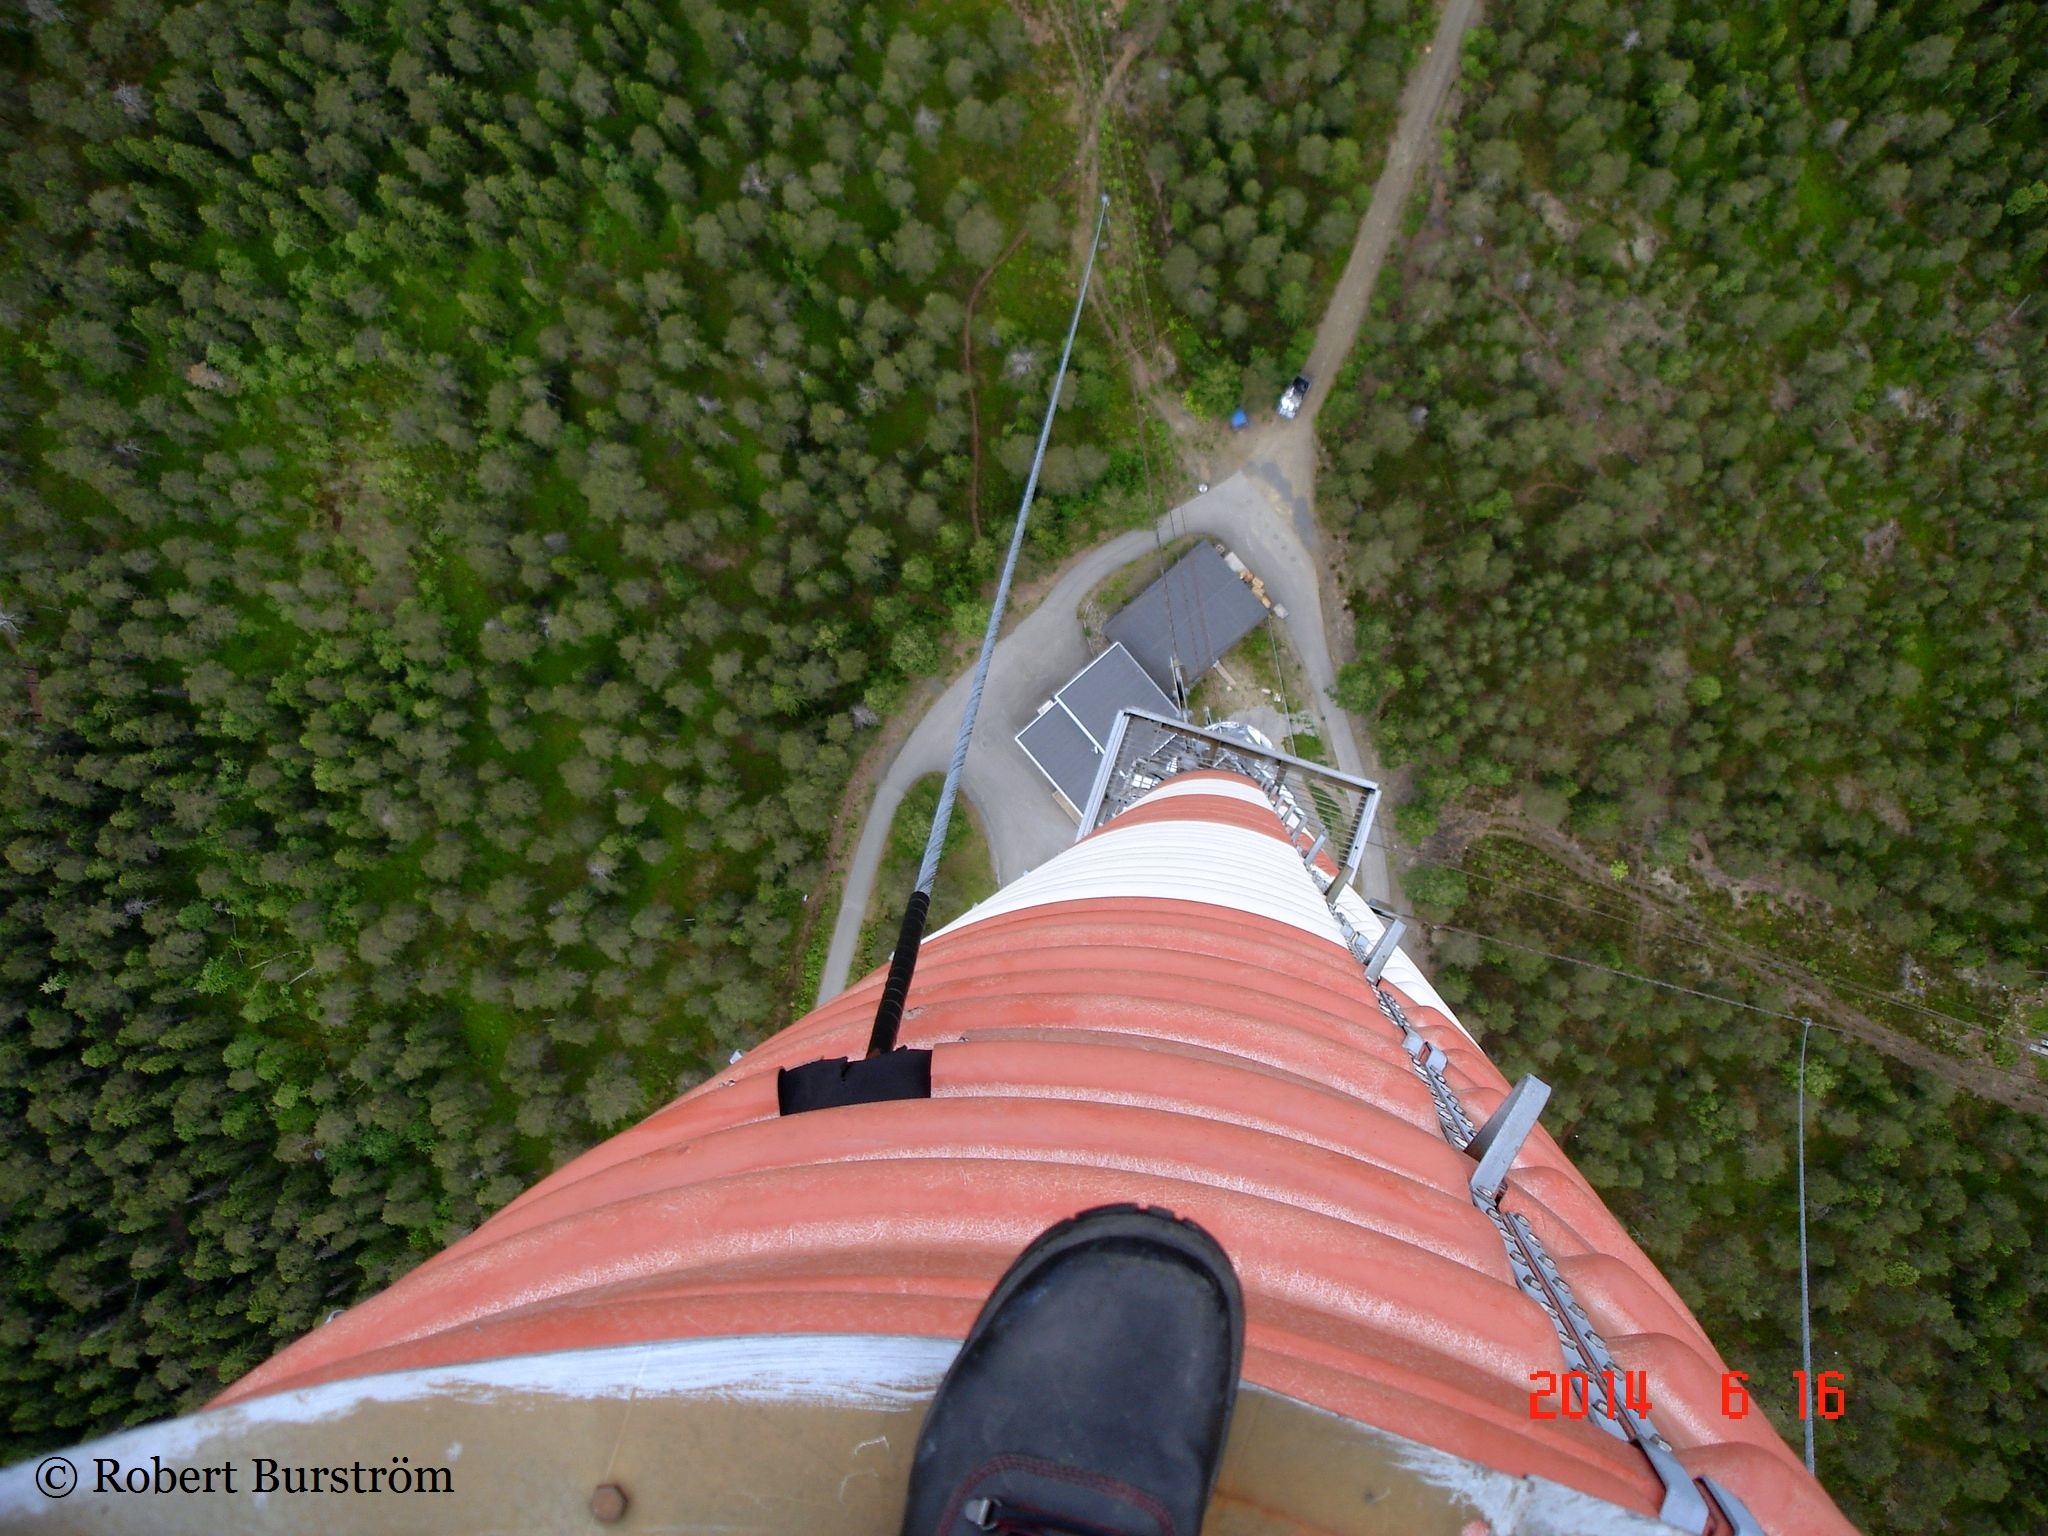 Top of the TV-tower